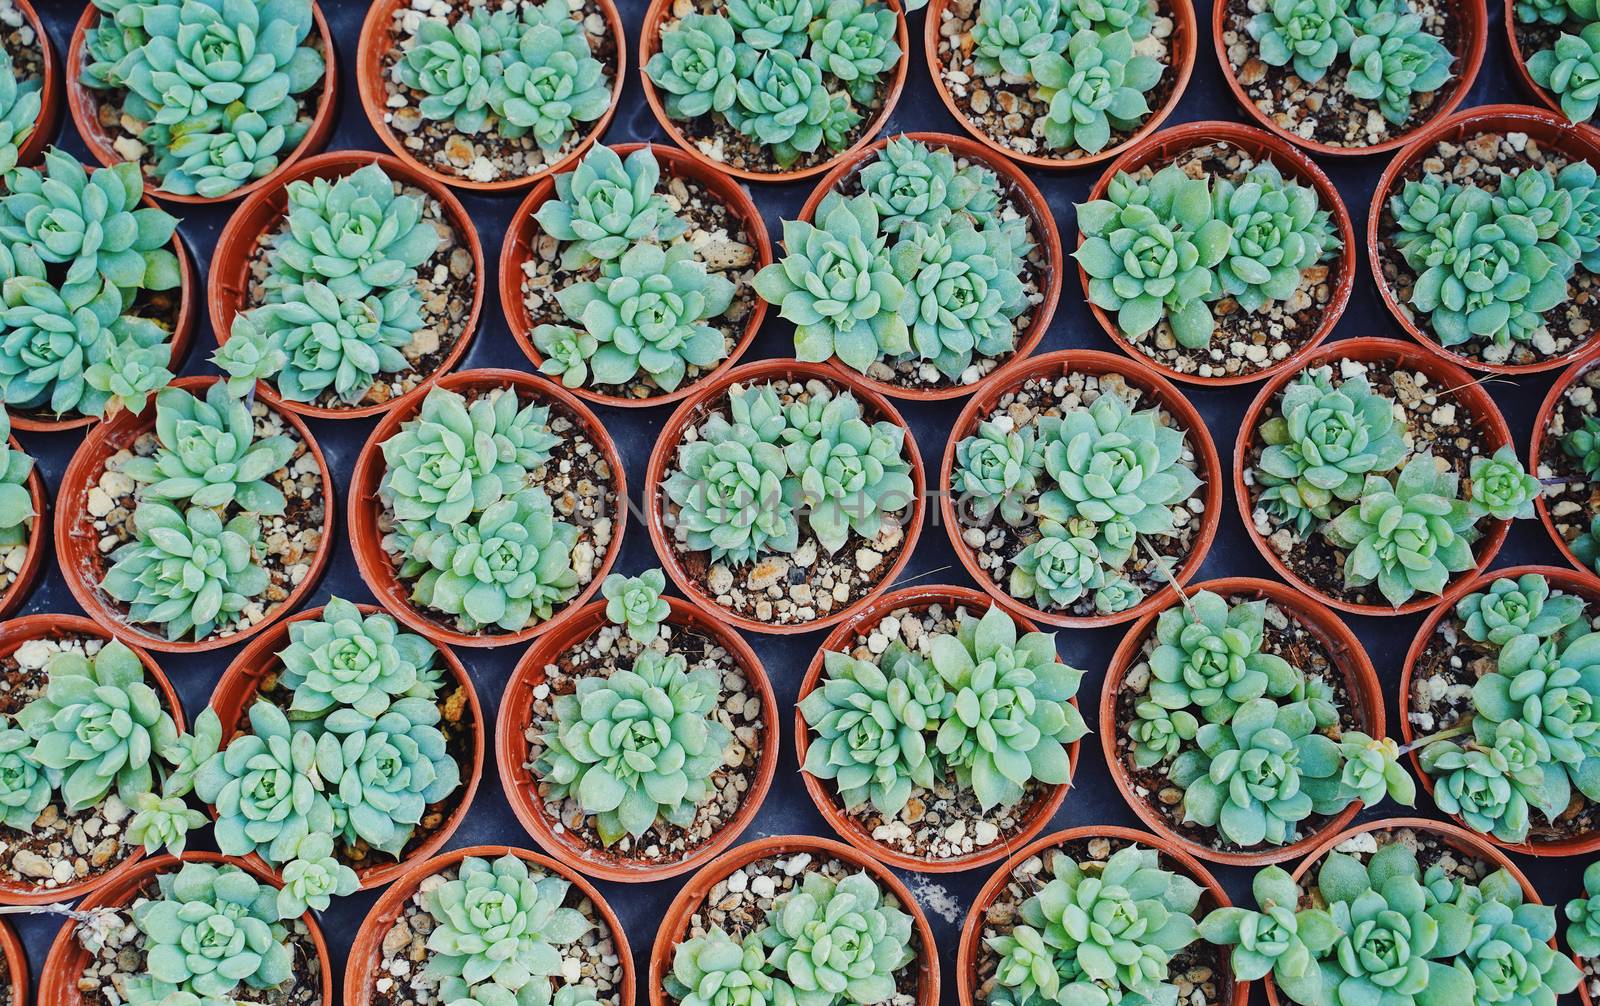 Top view of small cactus plant preparing for sale in the market by nuchylee